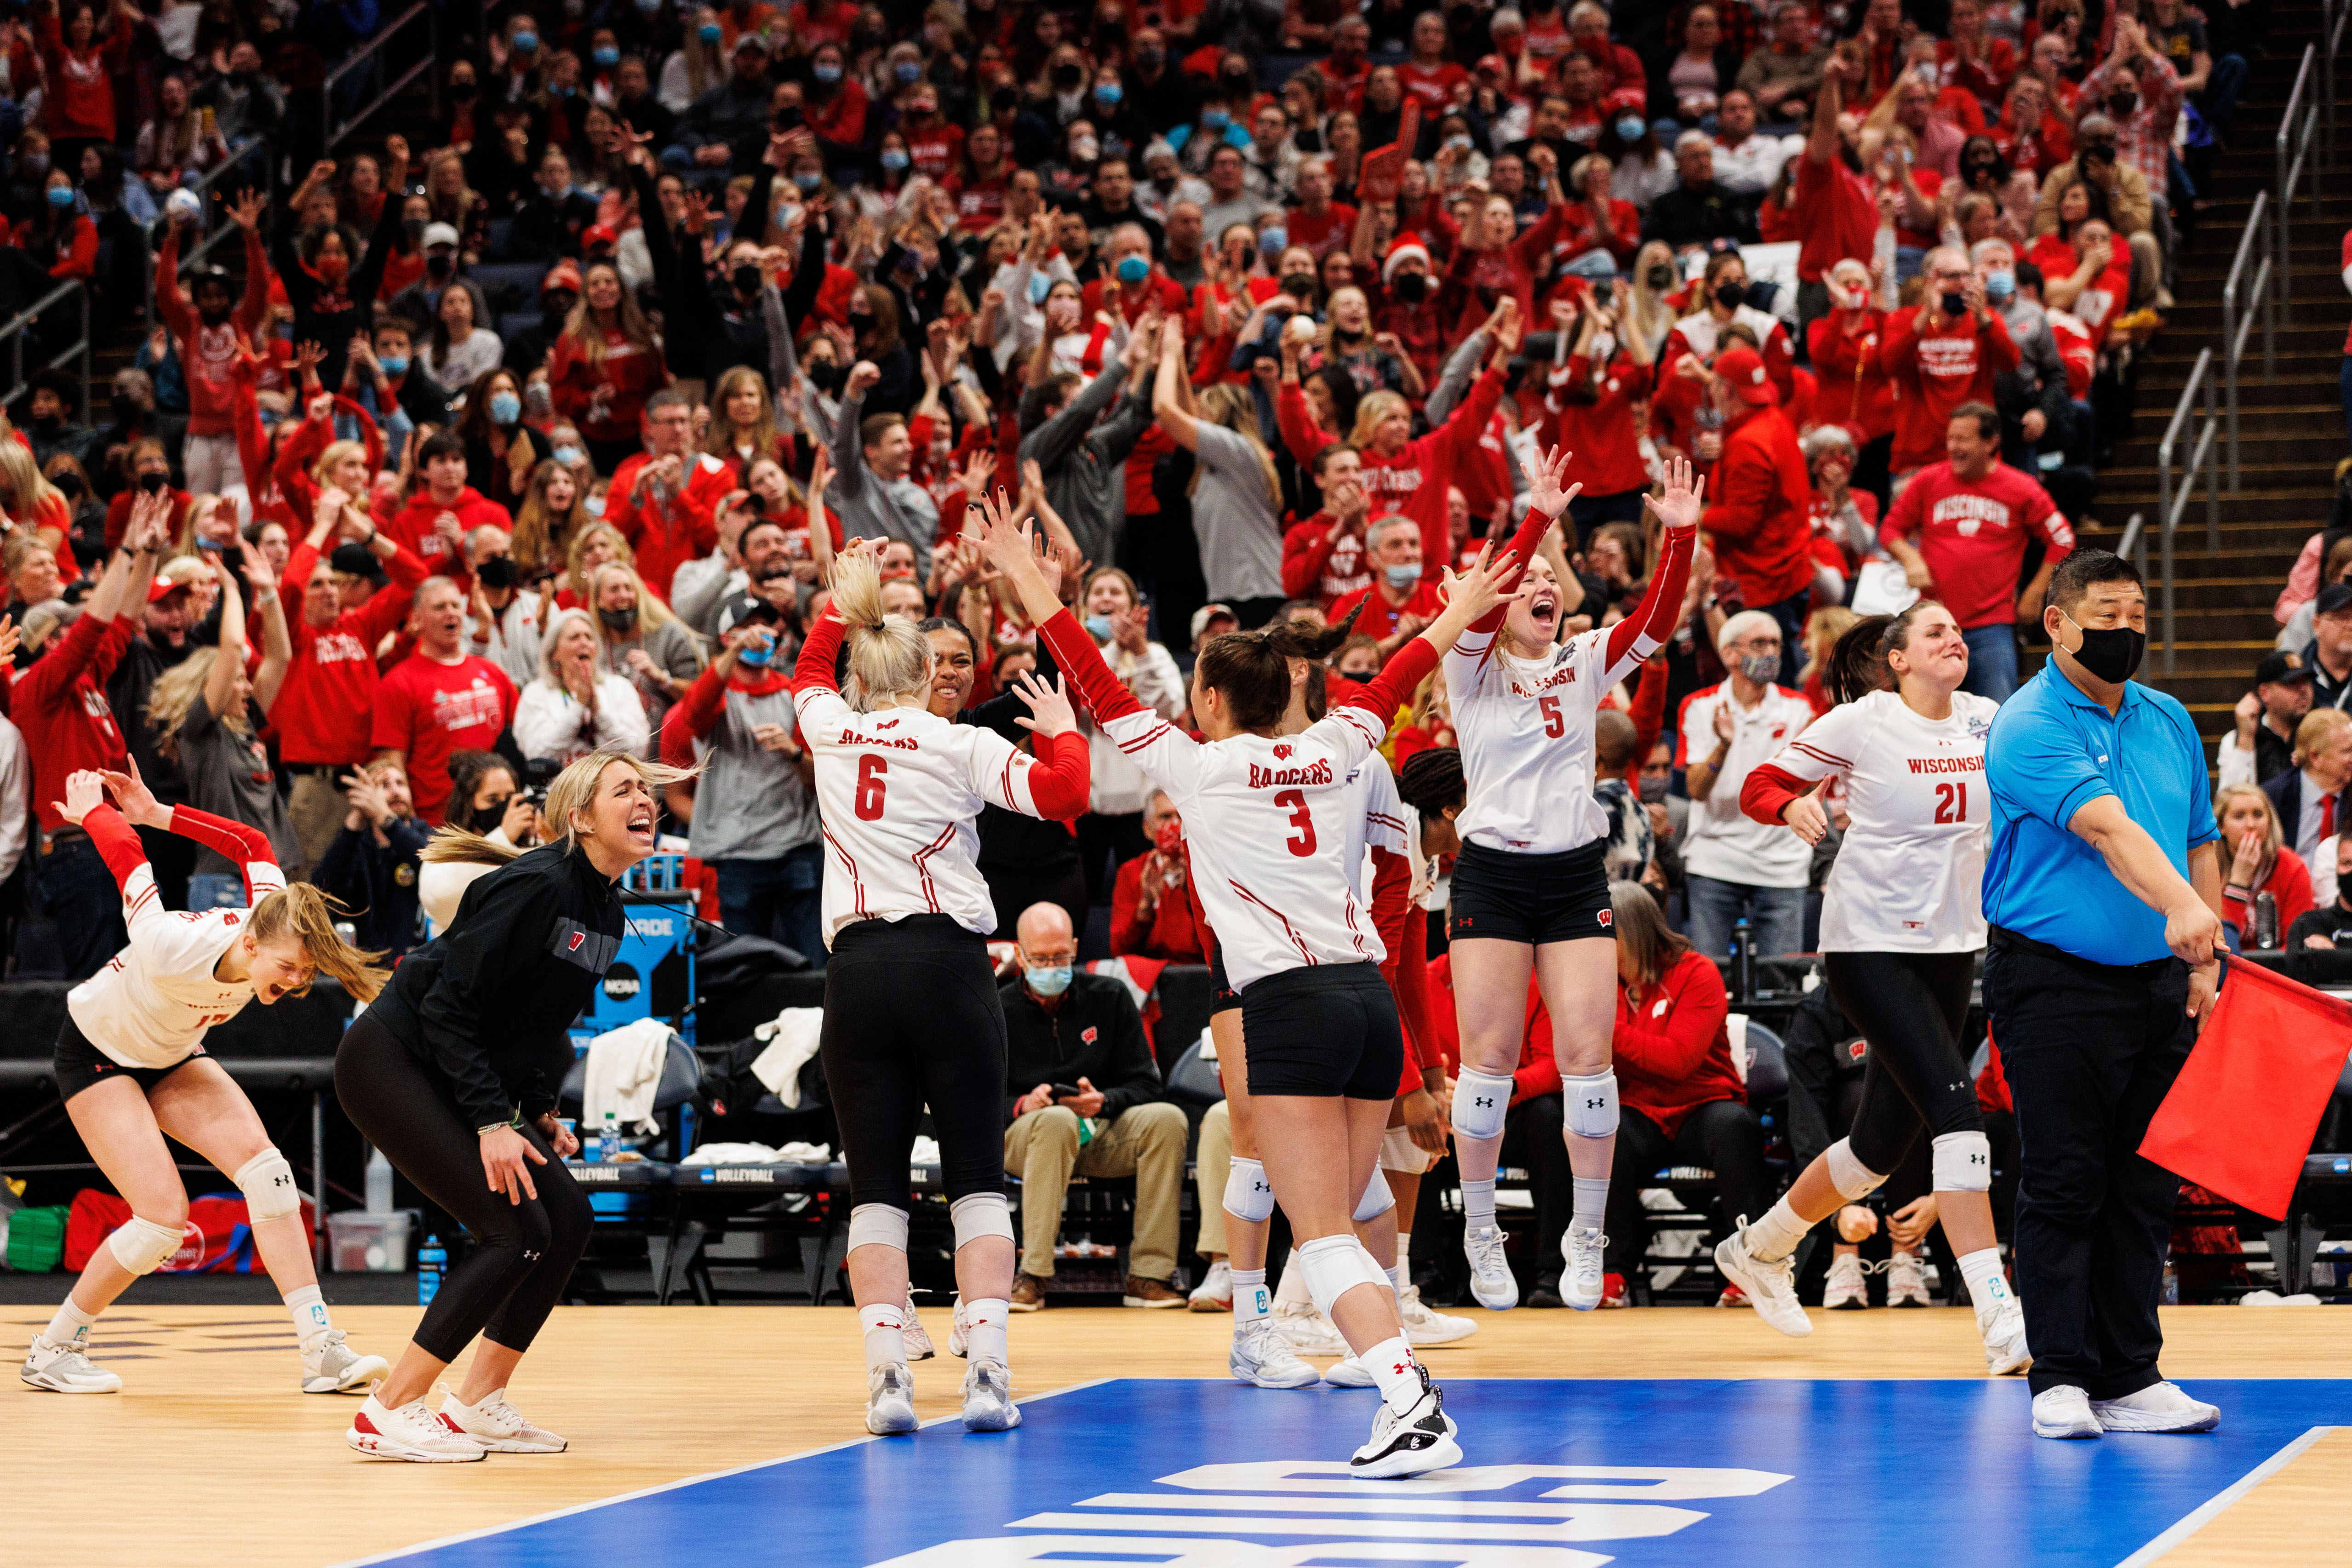 VOLLEYBALL: DEC 18 NCAA Division I Women’s Volleyball Championship